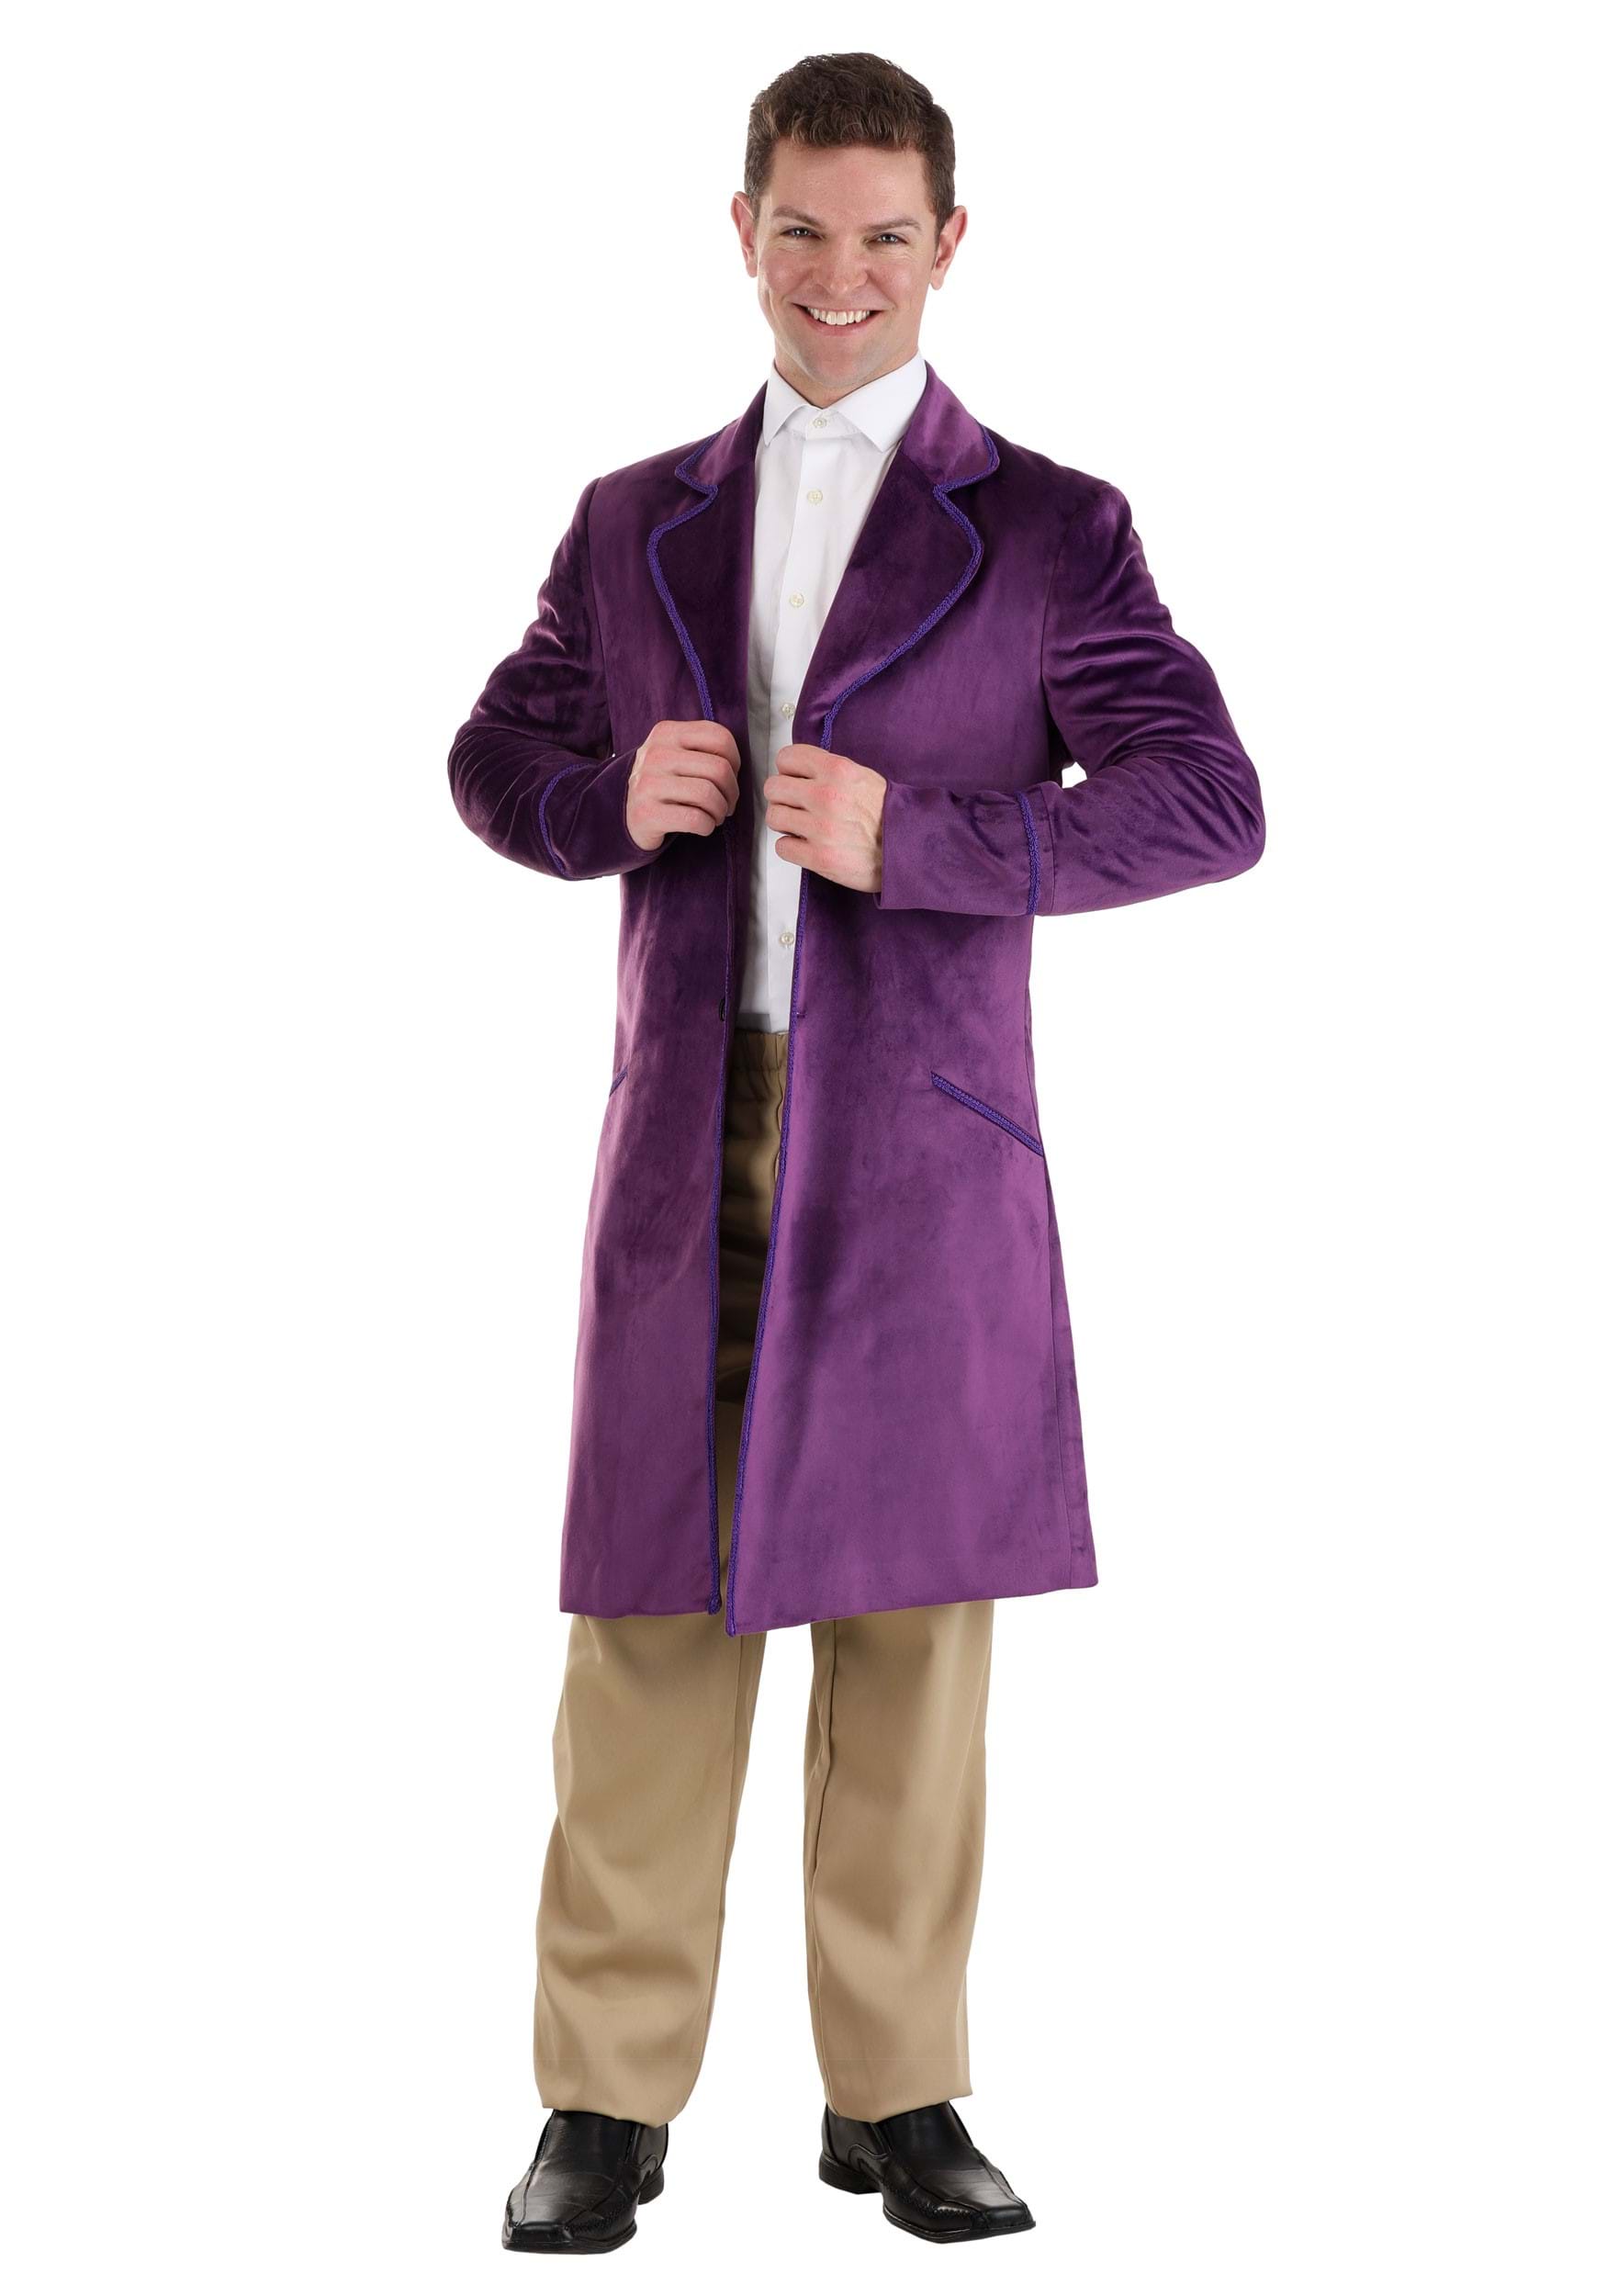 Image of Authentic Willy Wonka Costume Jacket for Men | Willy Wonka Costumes ID FUN1986AD-42